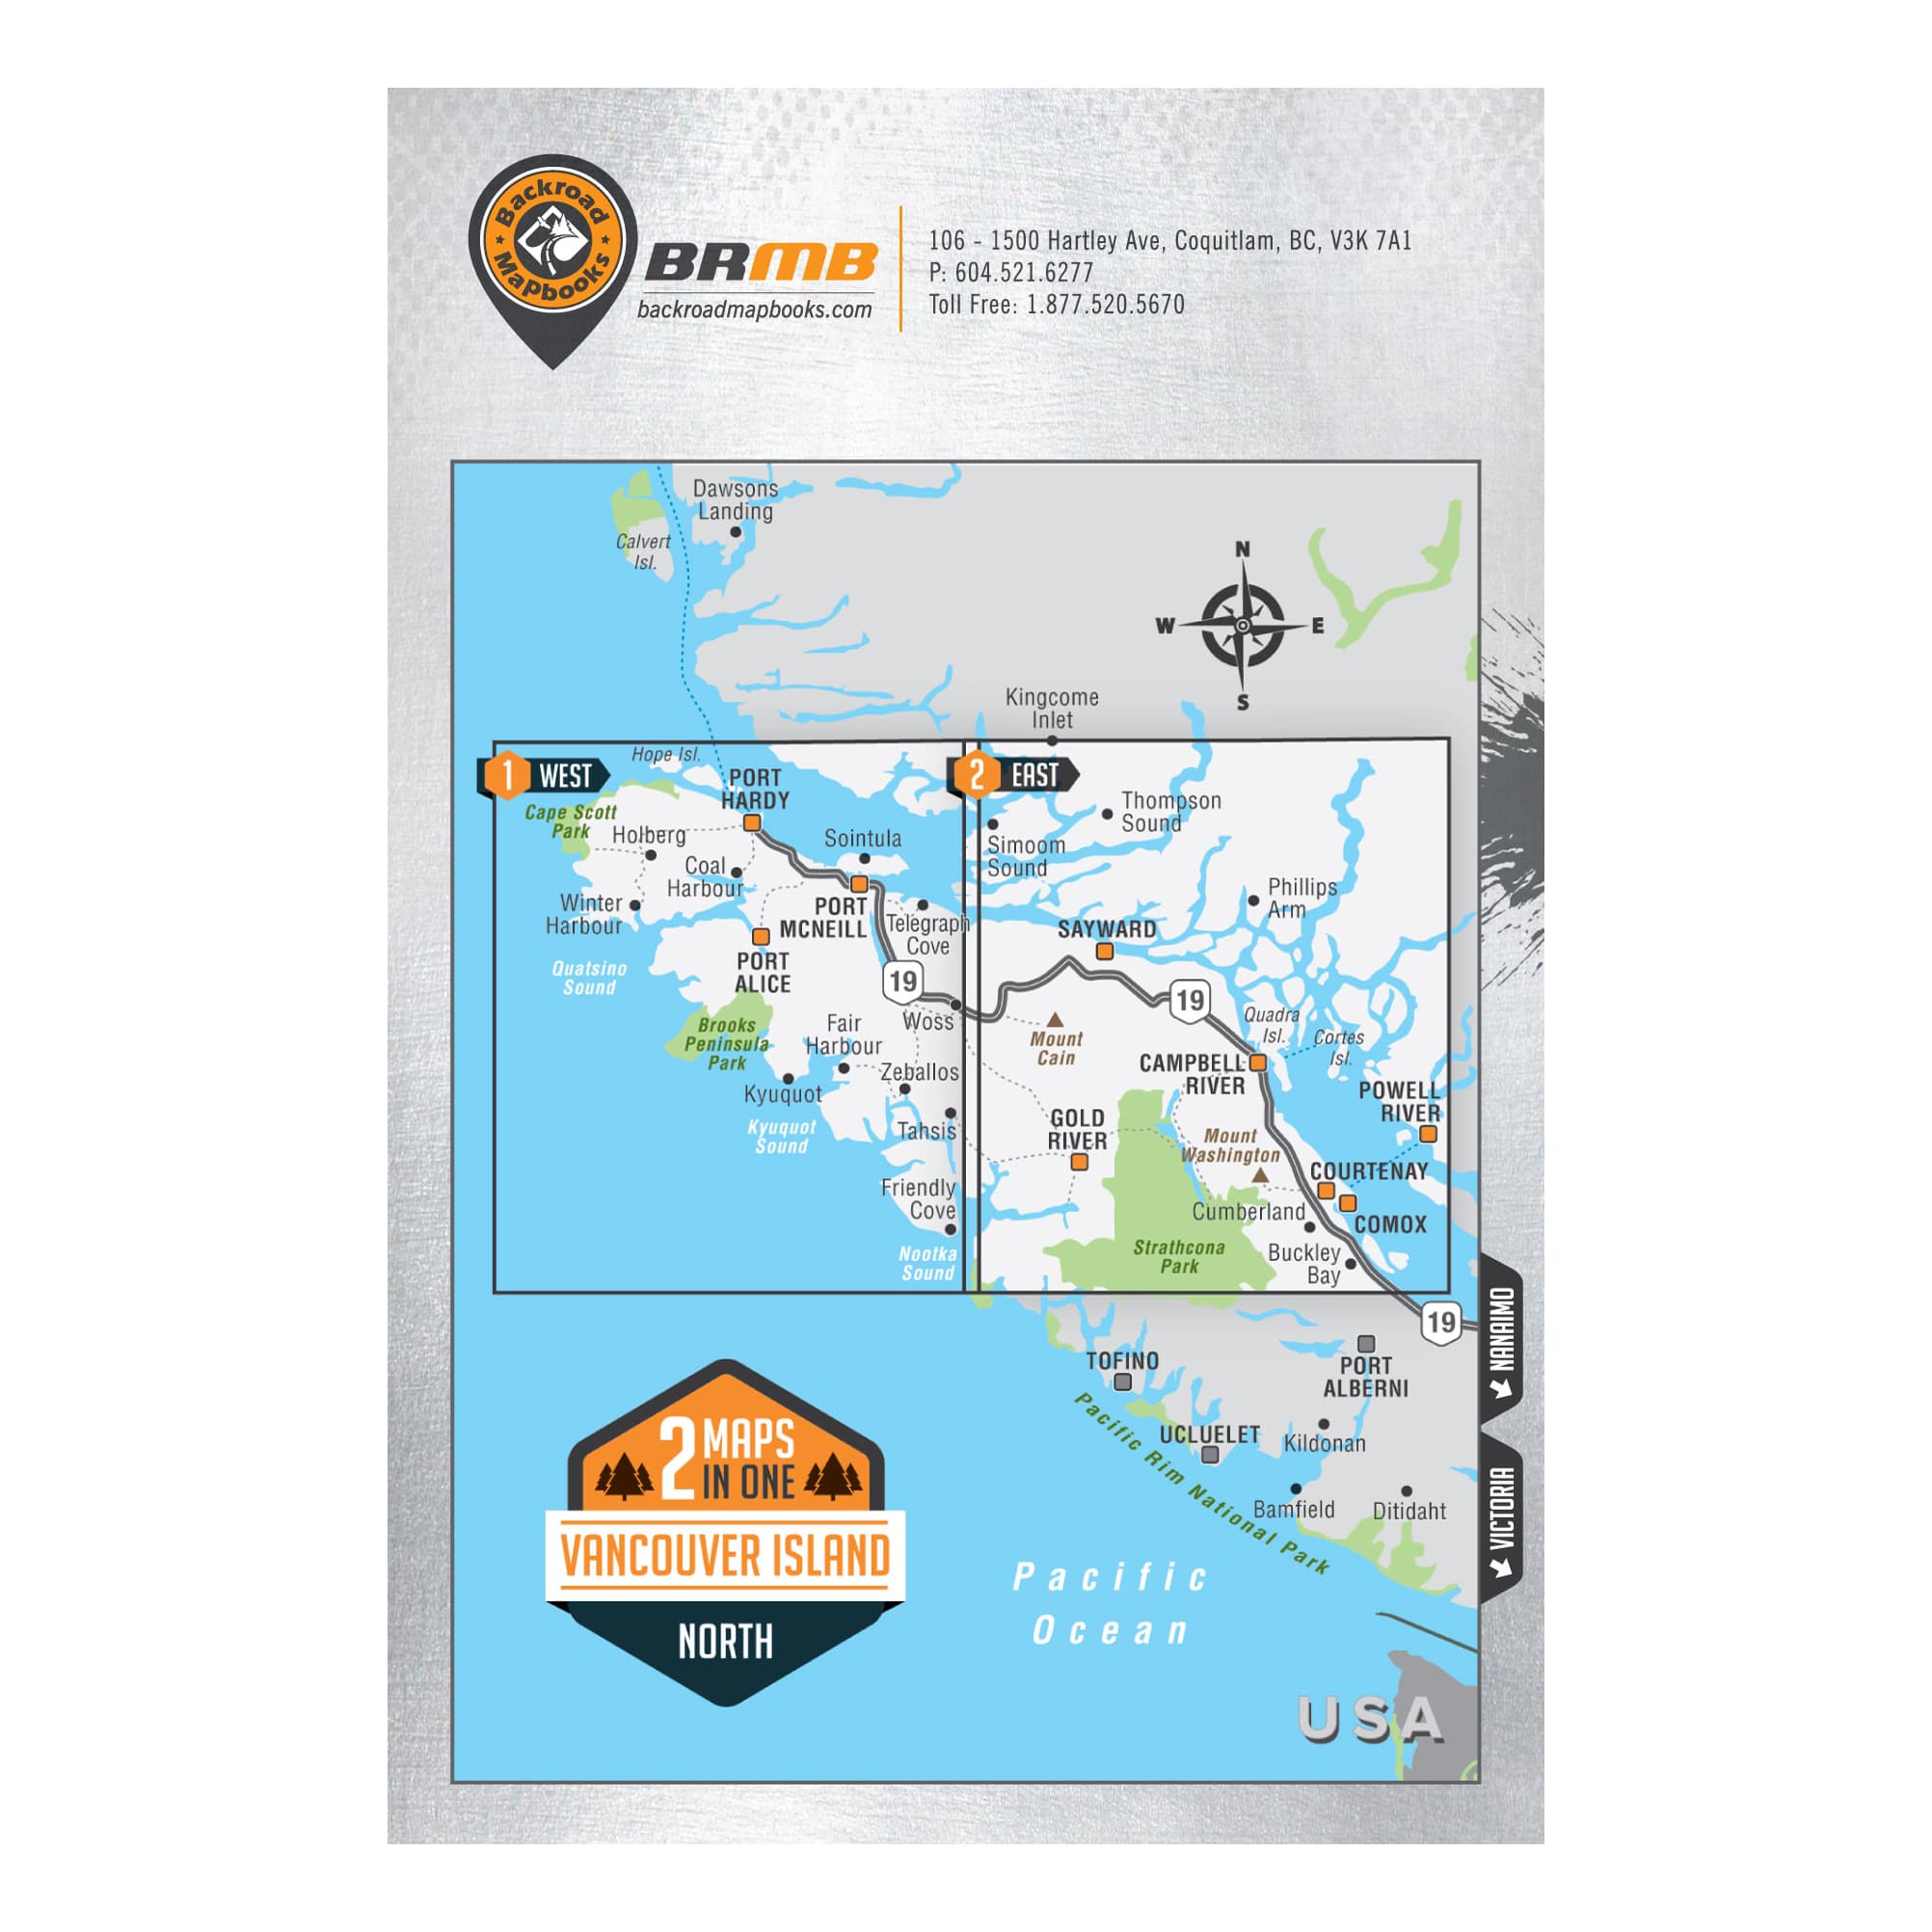 Backroad Mapbooks - 2nd Edition Vancouver Island North RecreationMap 